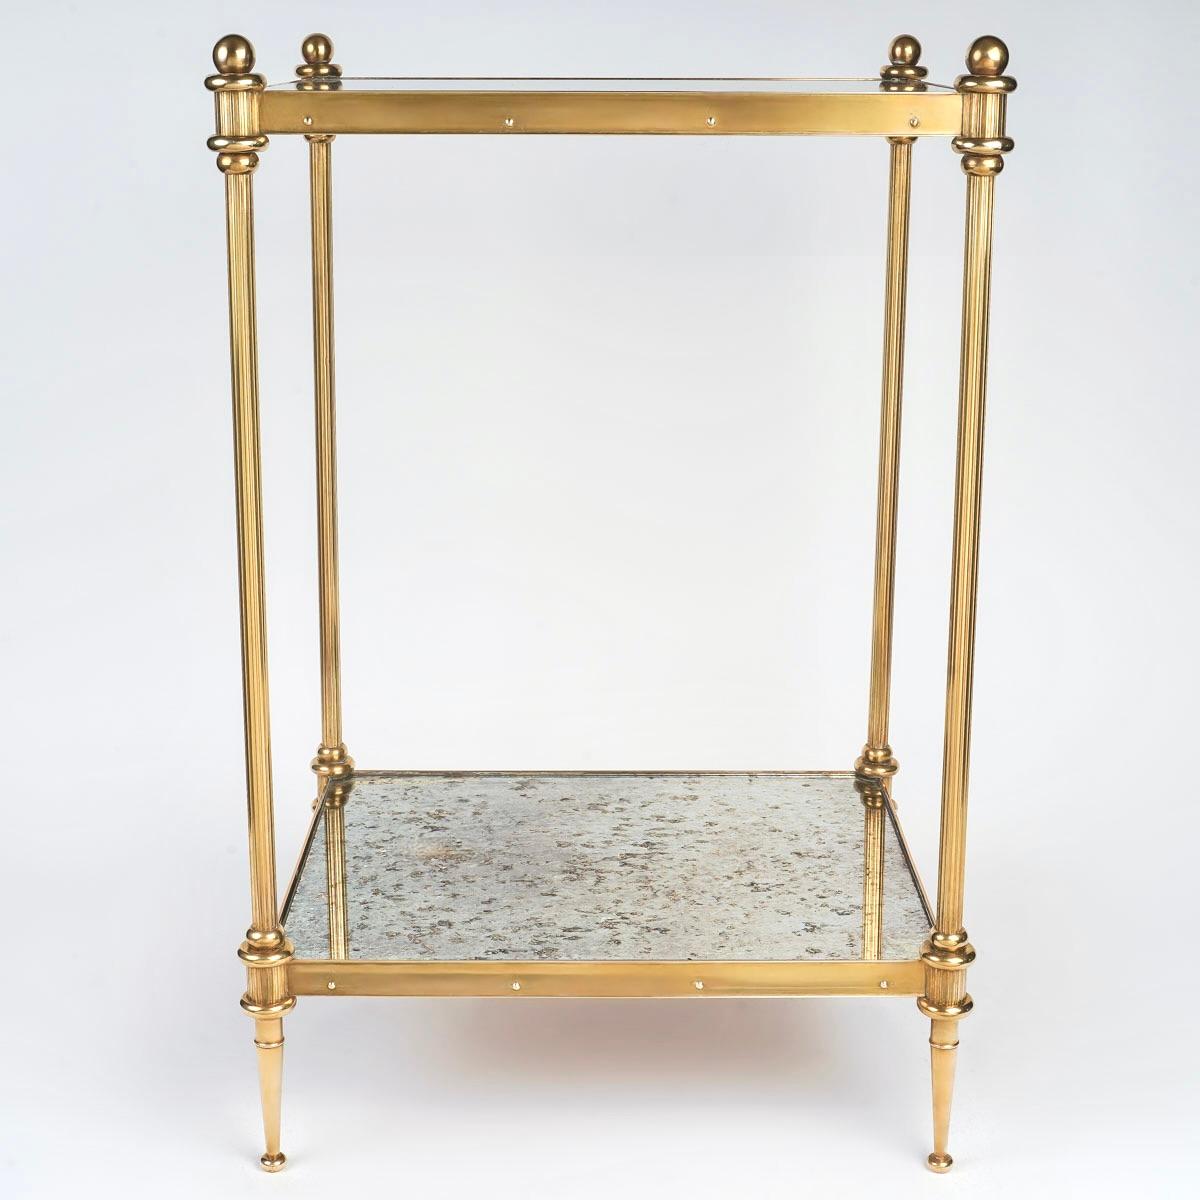 Each pedestal table is composed of 4 round, fluted ormolu rods, placed vertically at the four corners of the tables.
At the bottom, 4 tapered legs rest on small gilded-bronze 